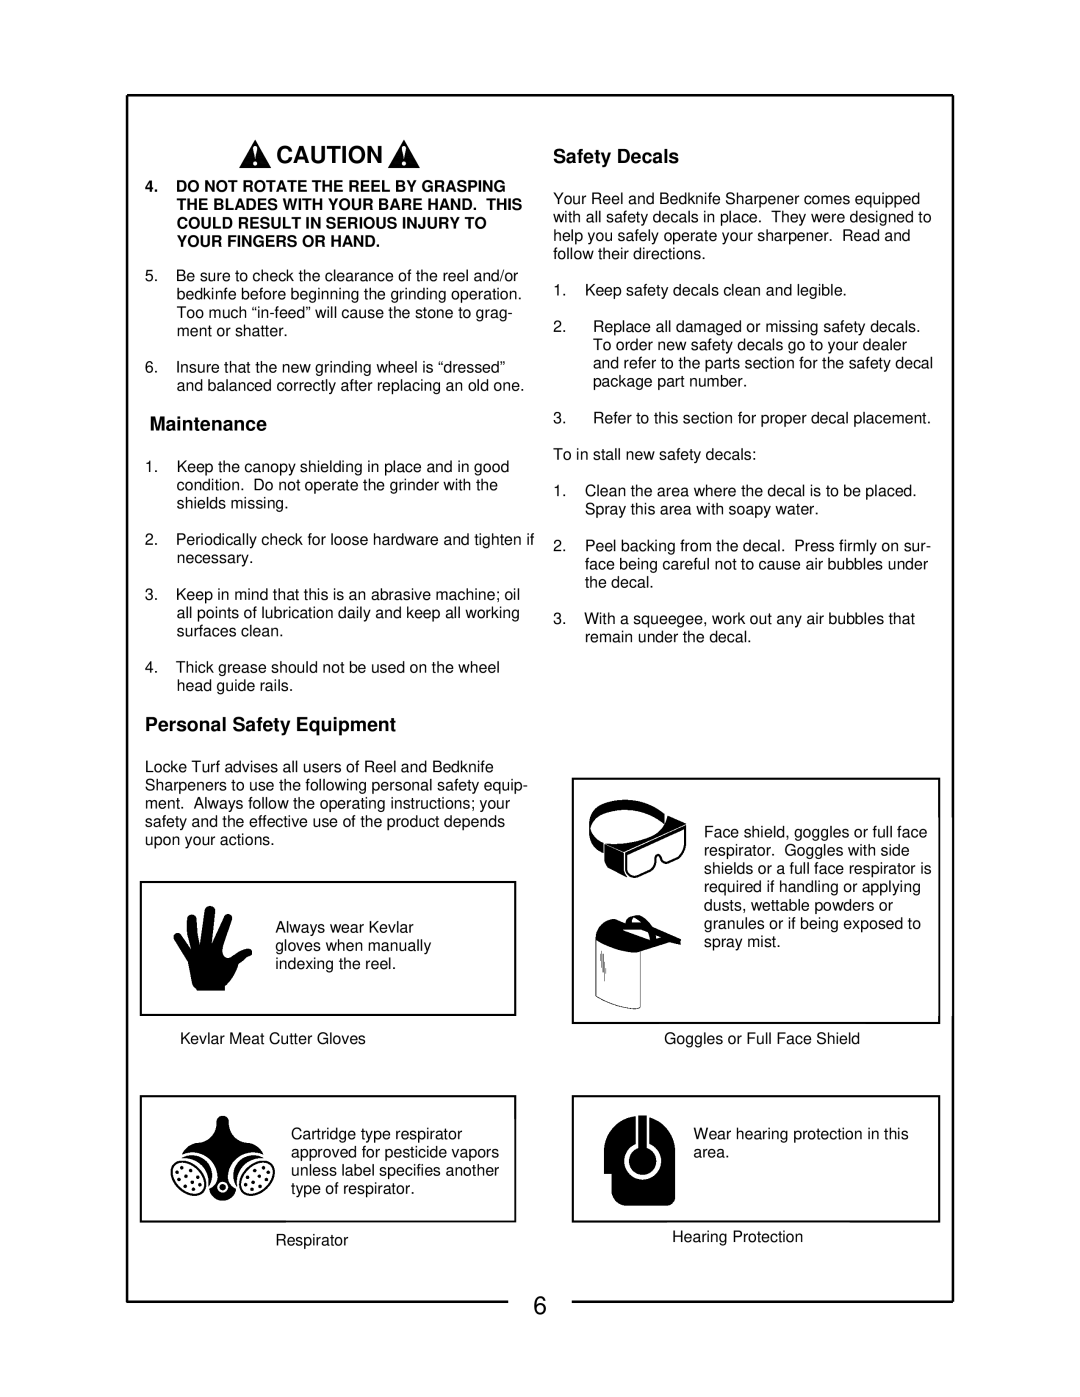 Locke RS-5100 manual Maintenance, Safety Decals, Personal Safety Equipment 